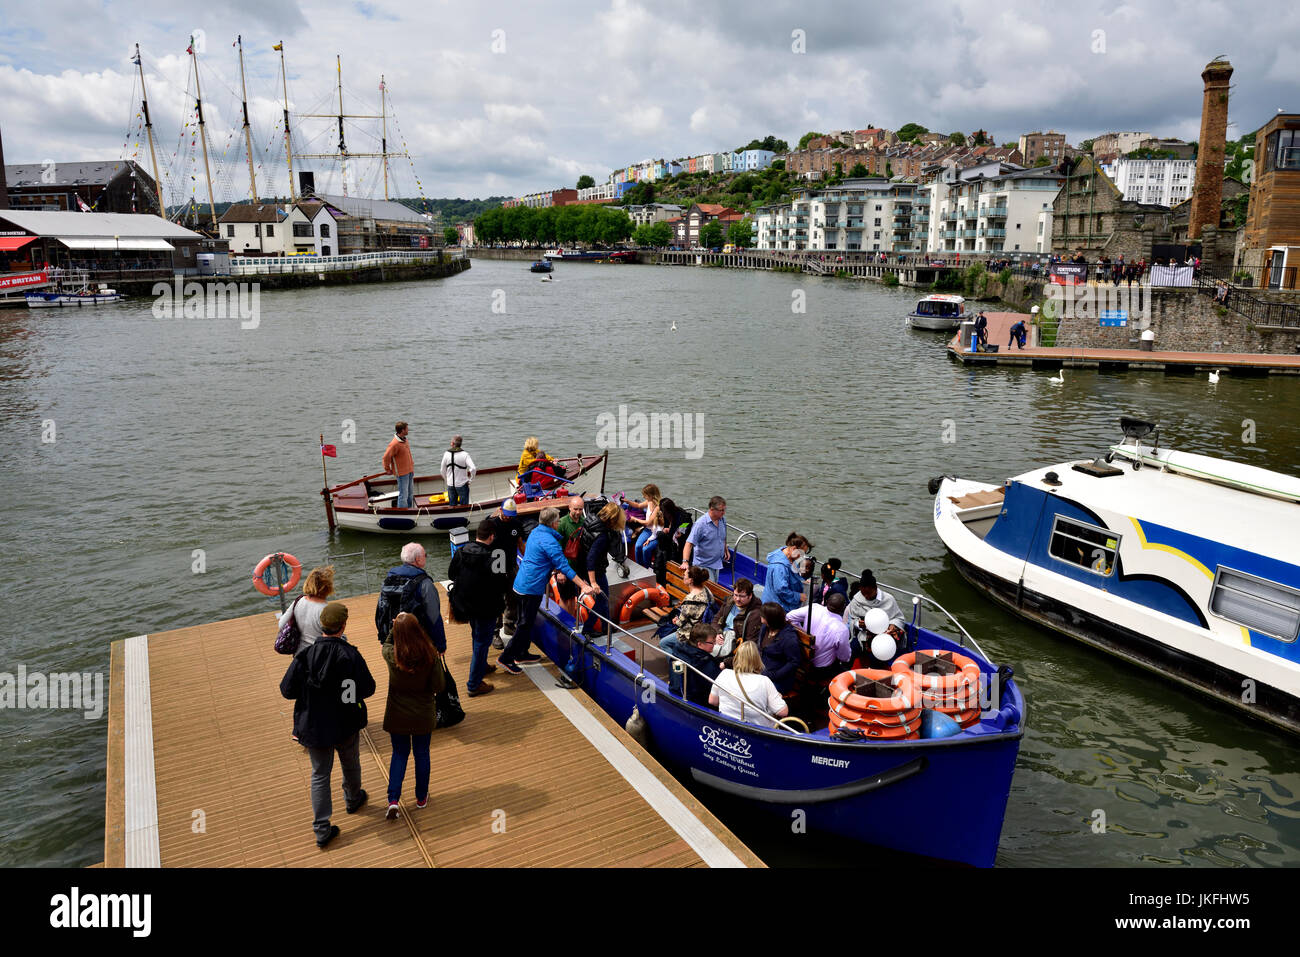 Bristol, UK. 23rd July, 2017. Rather mixed starting with heavy rain before the festival opened at 12:00 which then cleared to mixed sunshine and cloud. By 16:00 the forecasts were correct and a downpour commenced easing off at the official closing time for the festival. Some bright sun when these people were taking the cross harbour ferry. © Charles Stirling/Alamy Live News. Credit: Charles Stirling/Alamy Live News Stock Photo